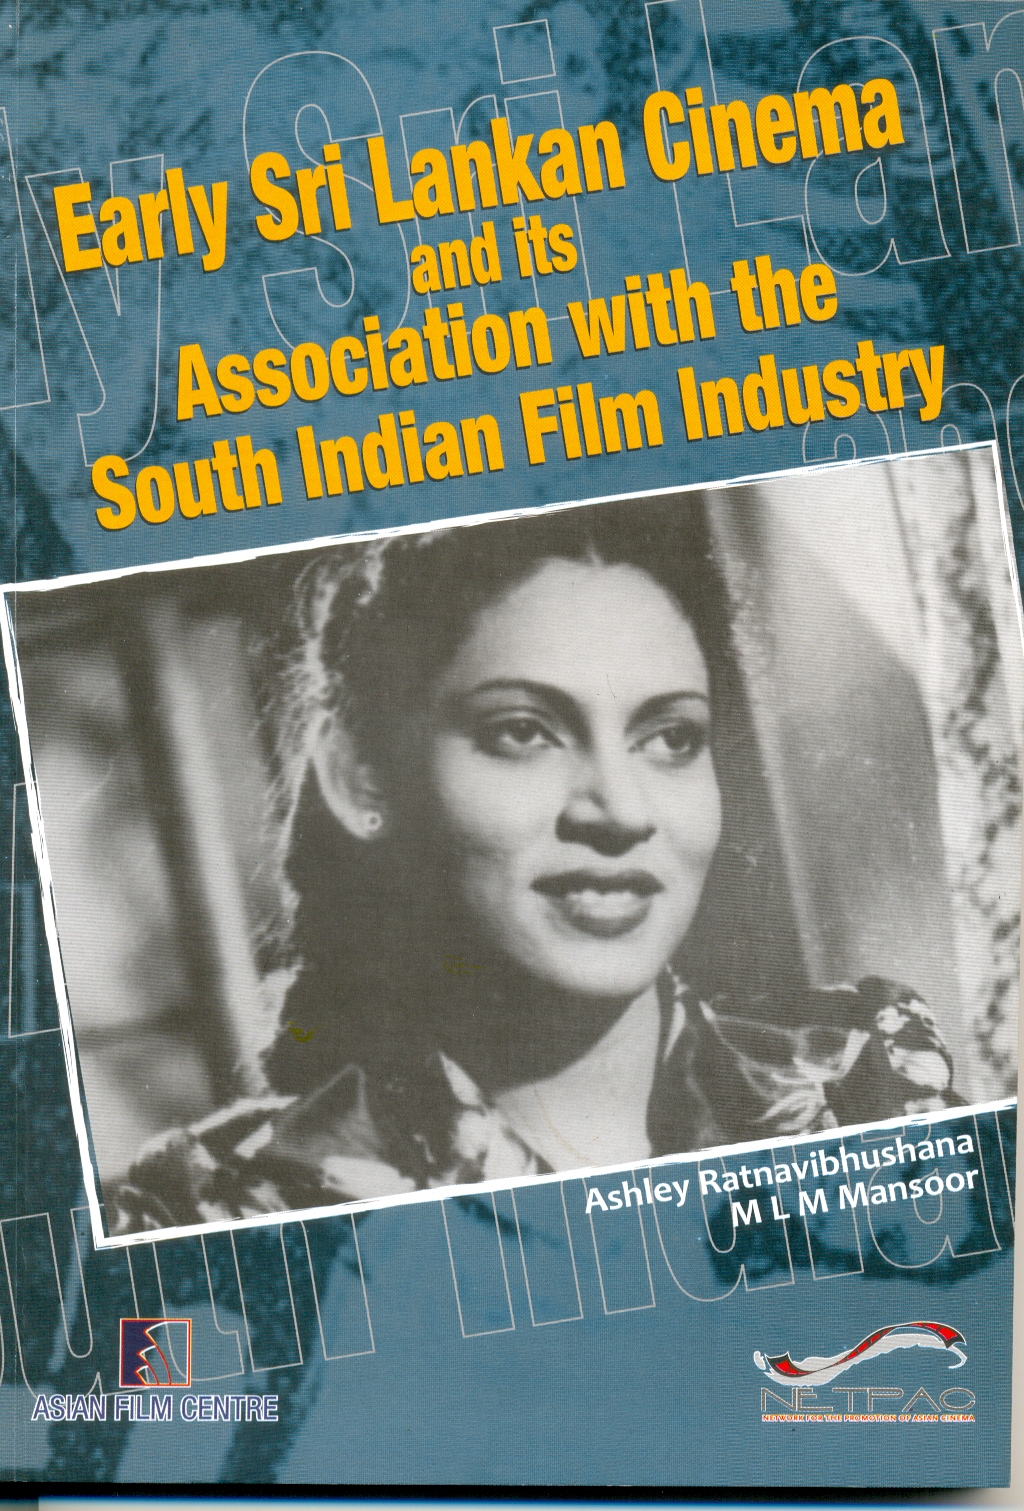 Early Sri Lankan Cinema and its Association with the South Indian Film Industry Image